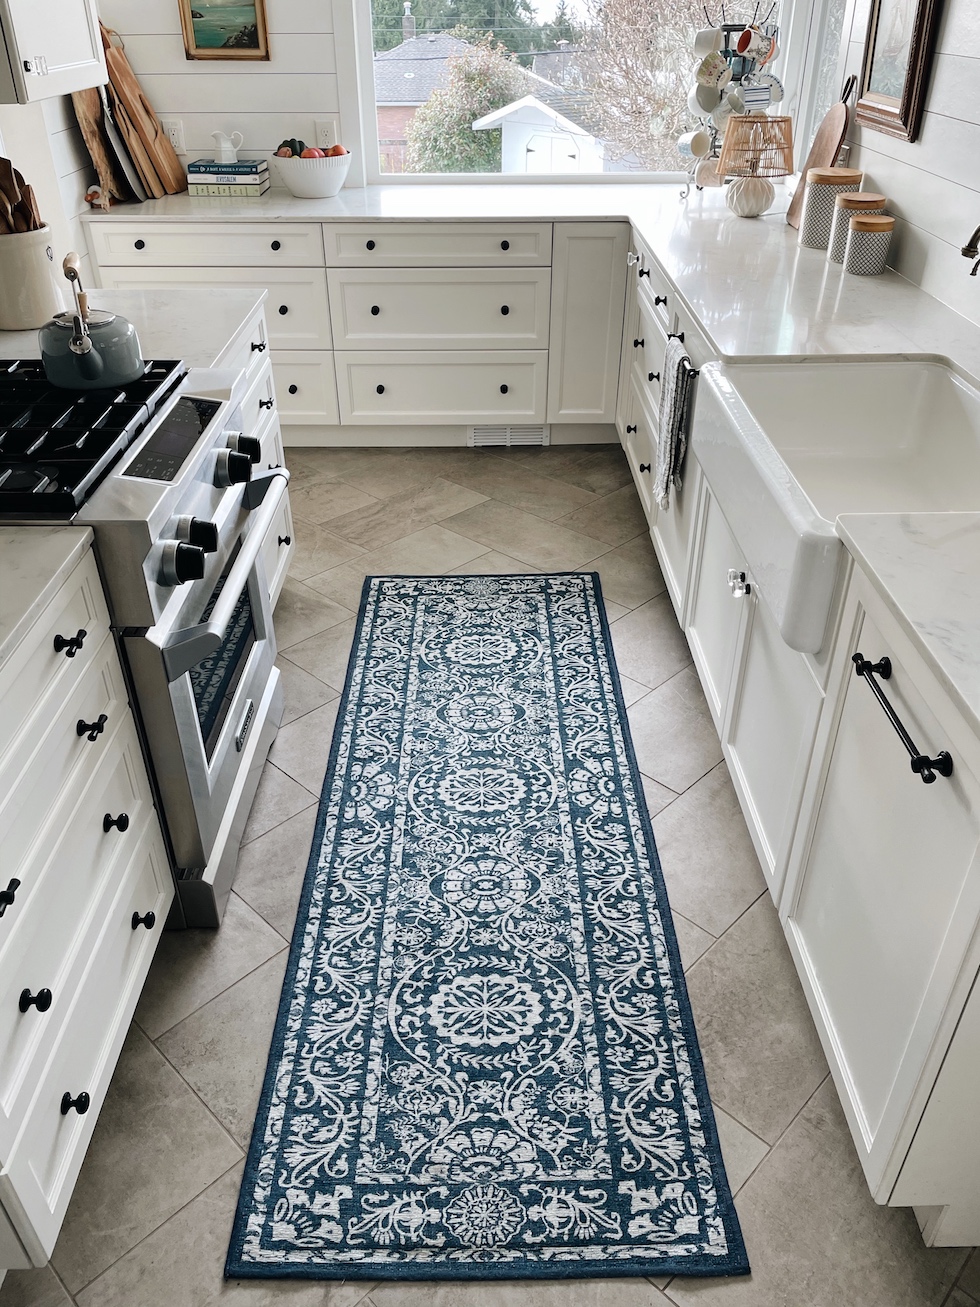 New Kitchen Runner (+ My Honest Thoughts on Ruggable Rugs and Favorite Designs)